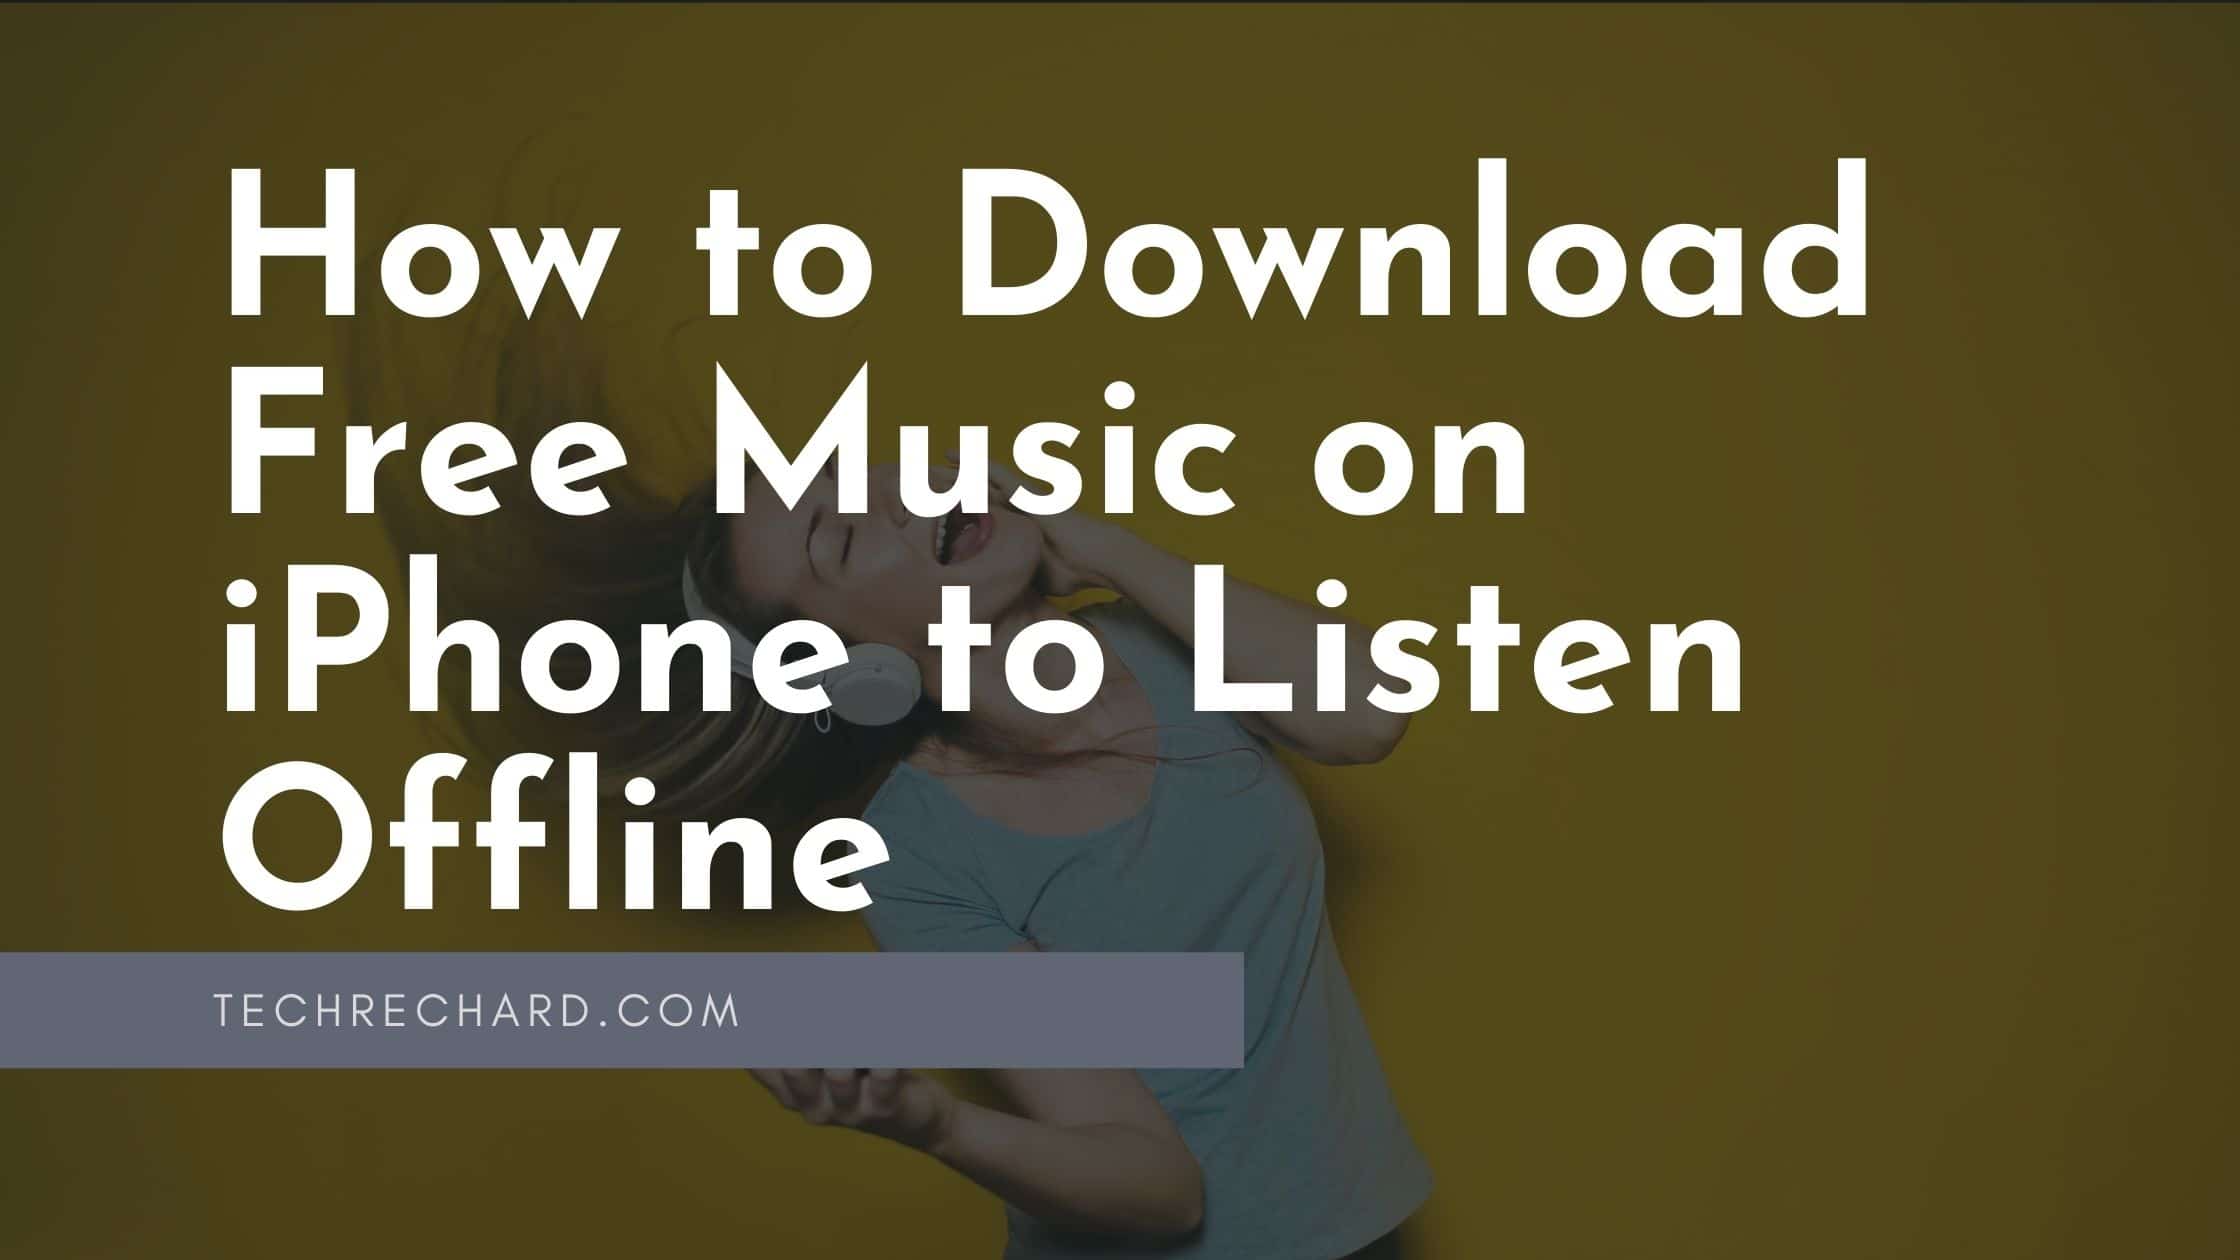 How to Download Free Music on iPhone to Listen Offline: 2 Methods